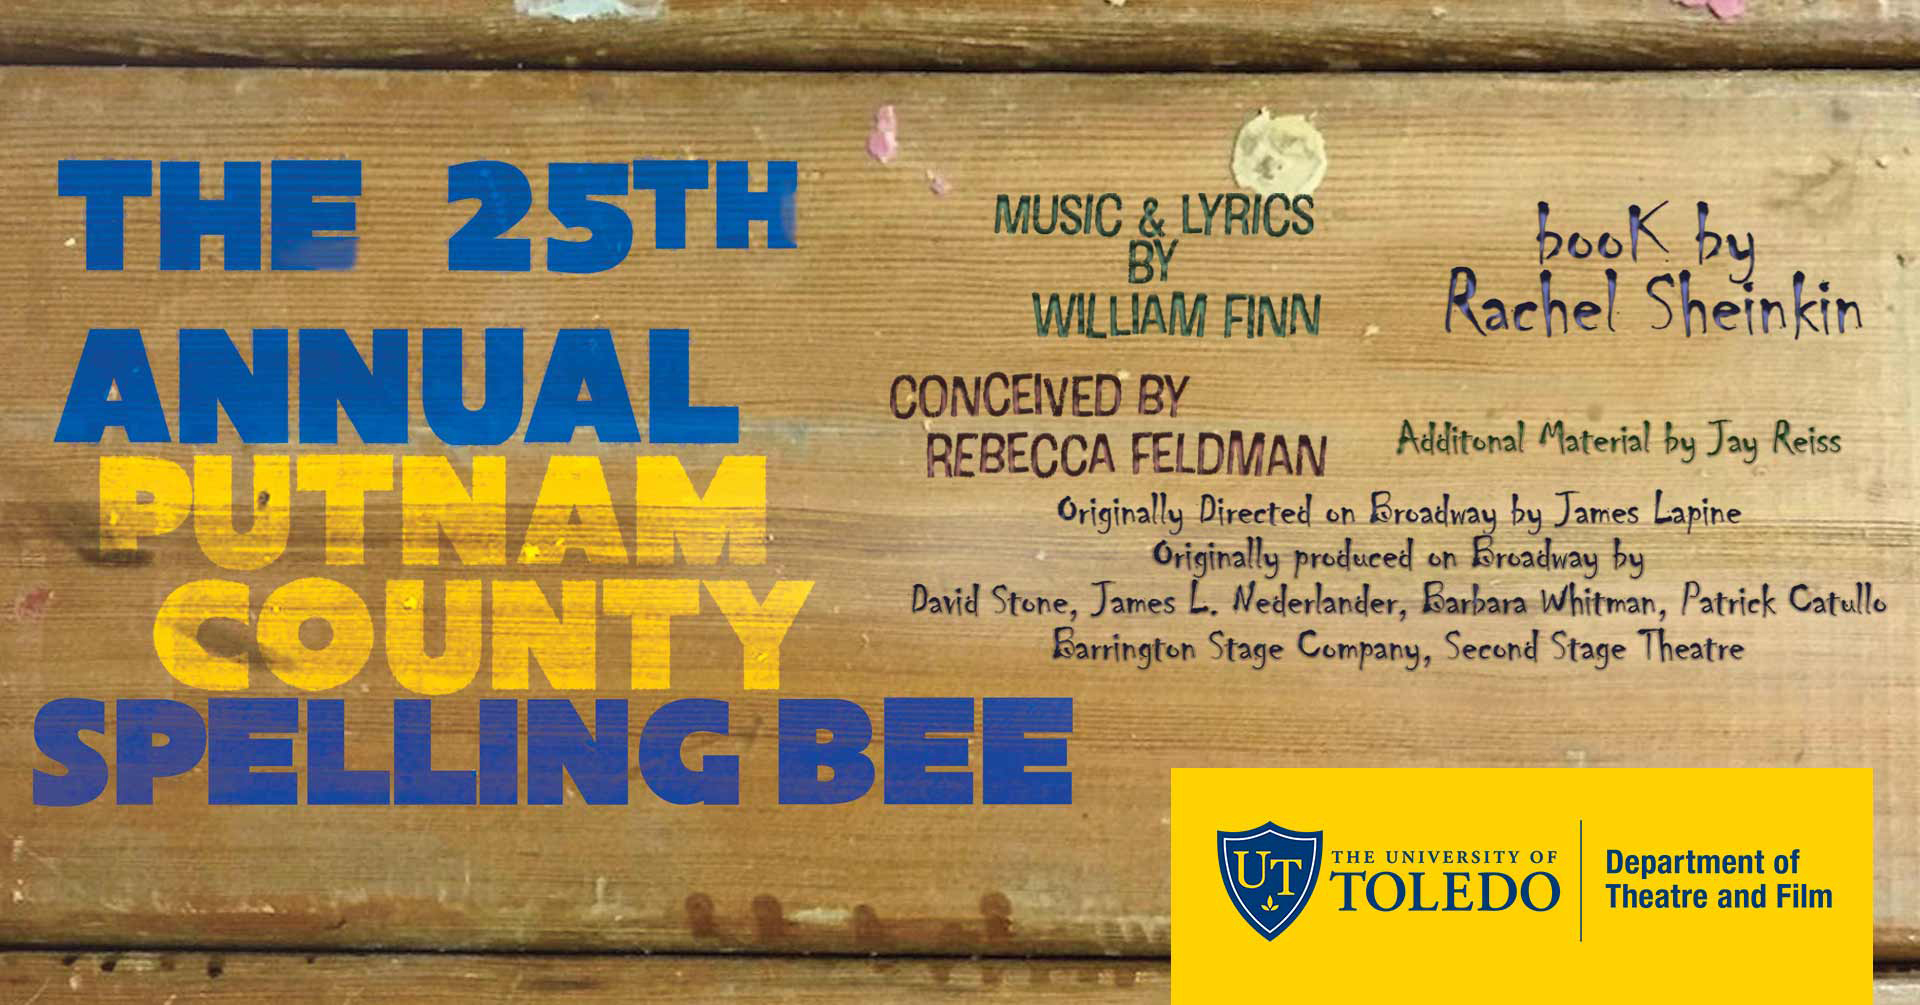 Poster graphic for the UToledo production of the musical, The 25th Annual Putnam County Spelling Bee" additional text includes the following credits: Music & Lyrics by William Finn, Book By Rachel Sheinkin  Conceived by Rebecca Feldman  Additional Material by Jay Reiss  Originally Directed on Broadway by James Lapine  Originally produced on Broadway by David Stone, James L. Nederlander, Barbara Whitman, Patrick Catullo, Barrington Stage Company, Second Stage Theatre